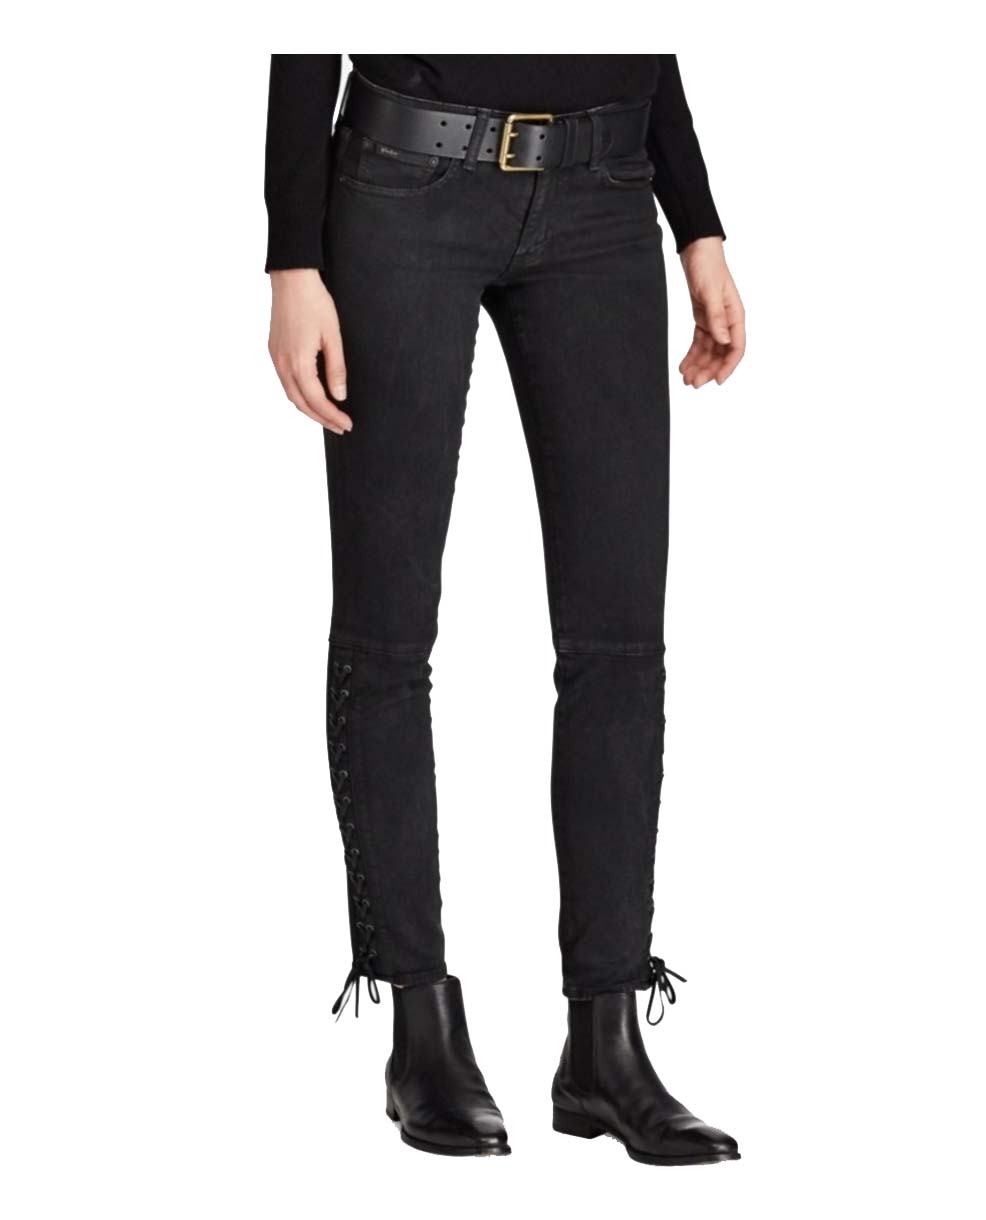 Polo RL Women's Lace Tomkins Skinny Denim Jeans - image 4 of 4